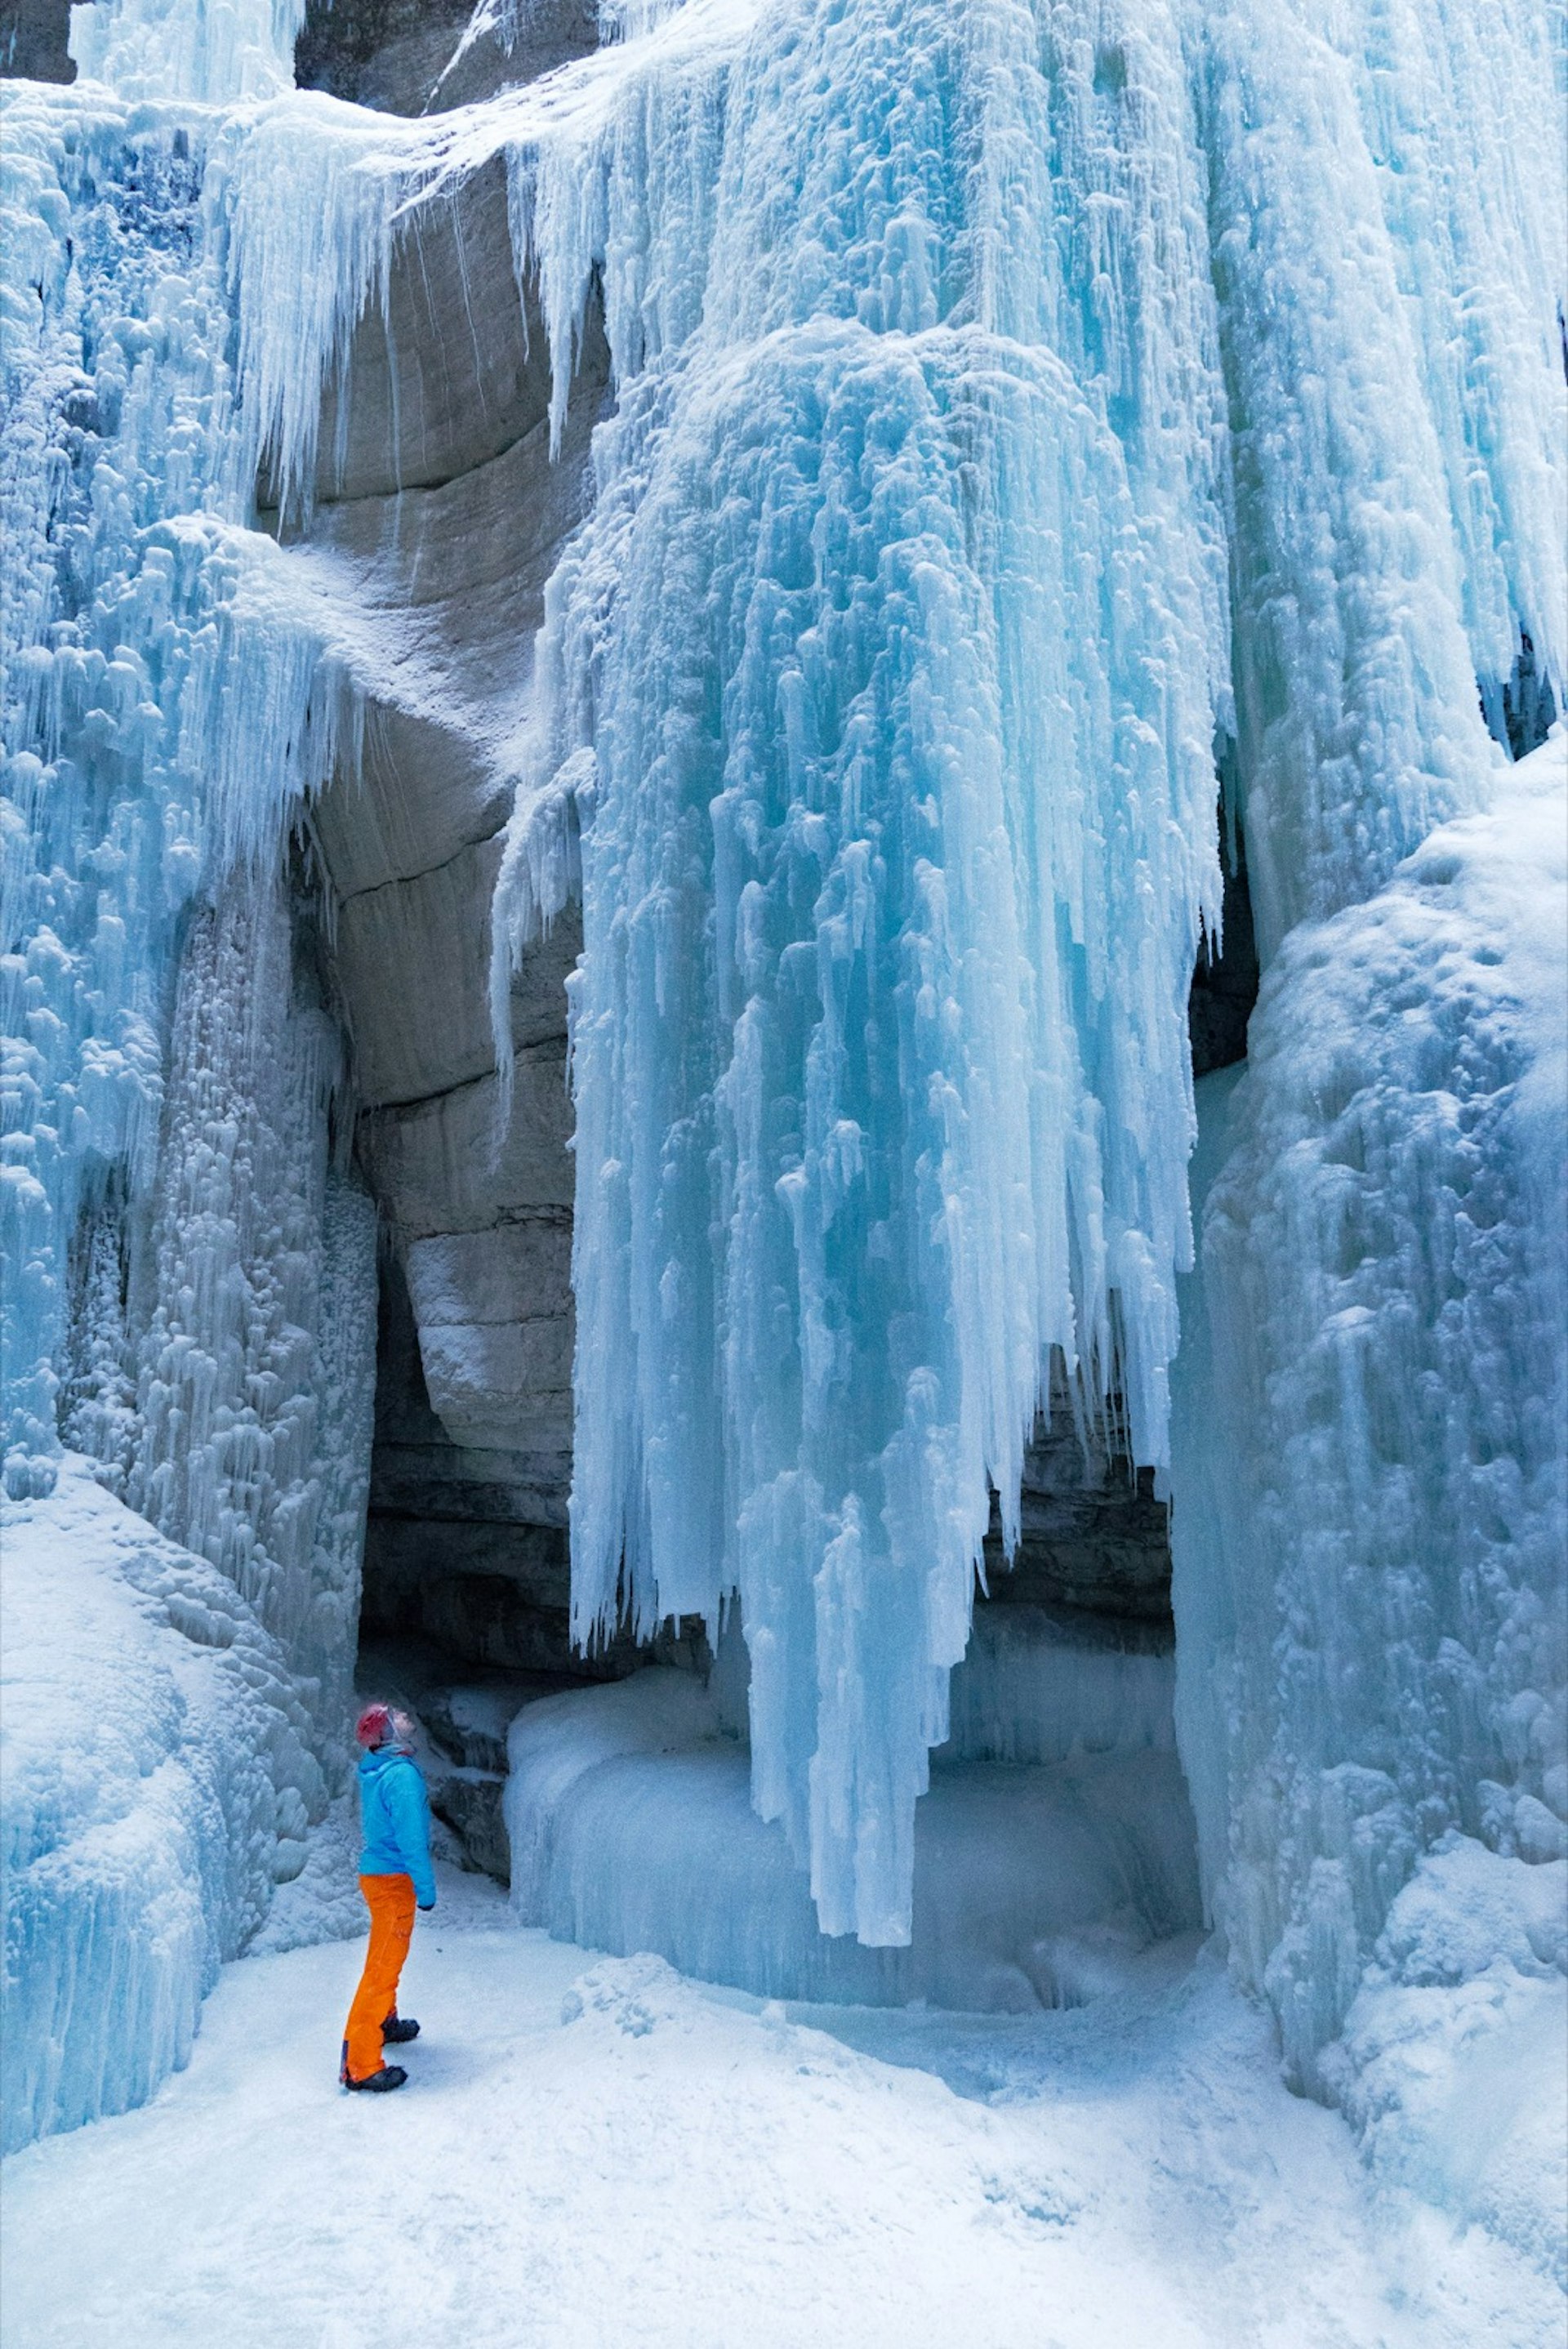 A very small looking person gazes up at a huge curtain of solid ice made from a frozen waterfall. Winter in Alberta Canada